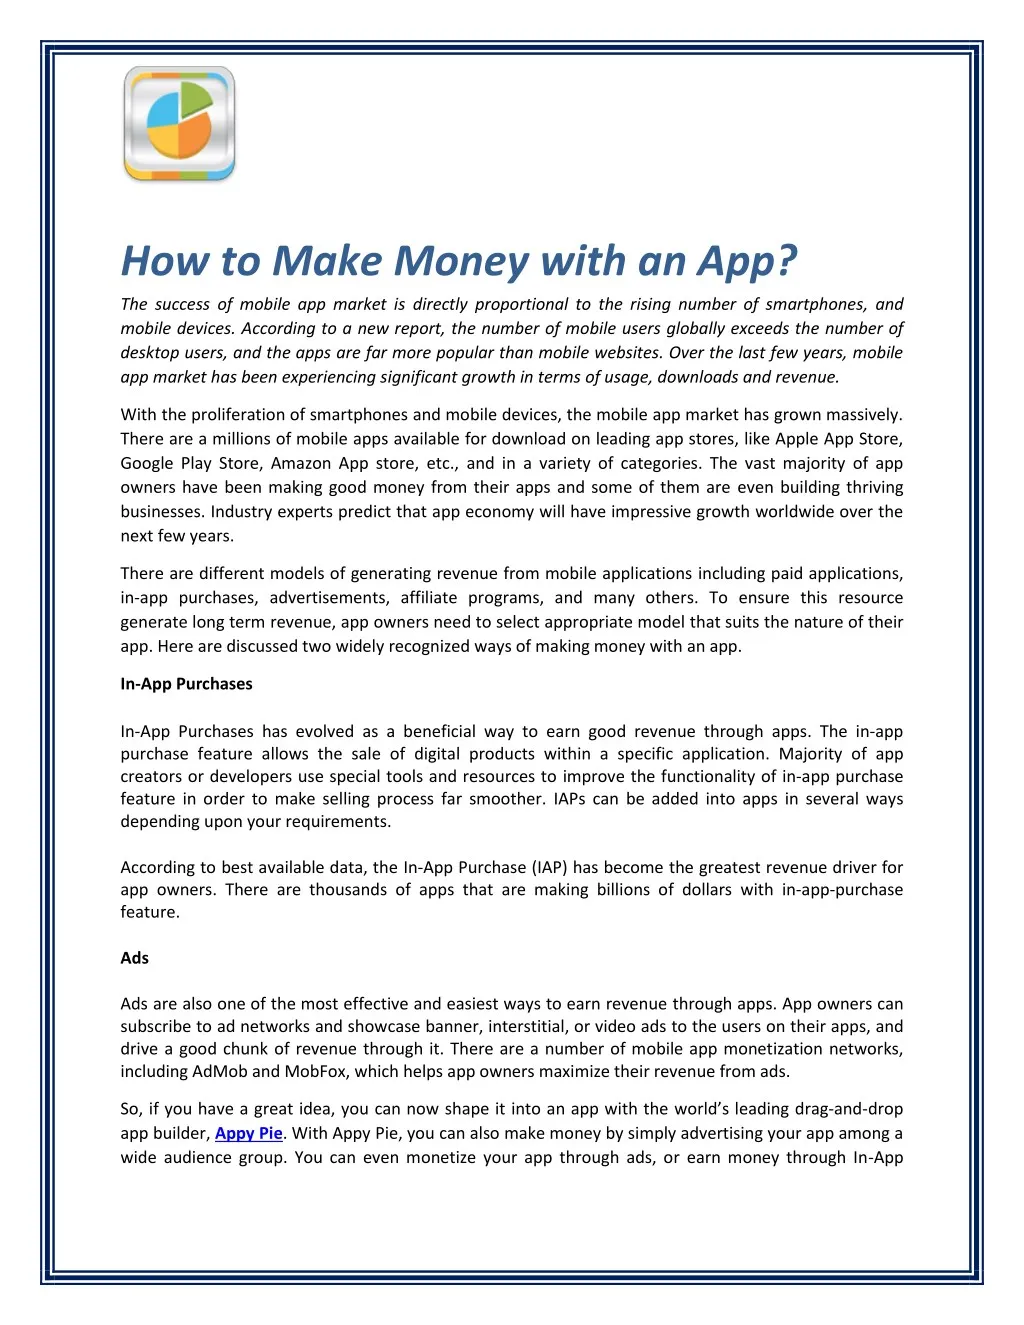 how to make money with an app the success